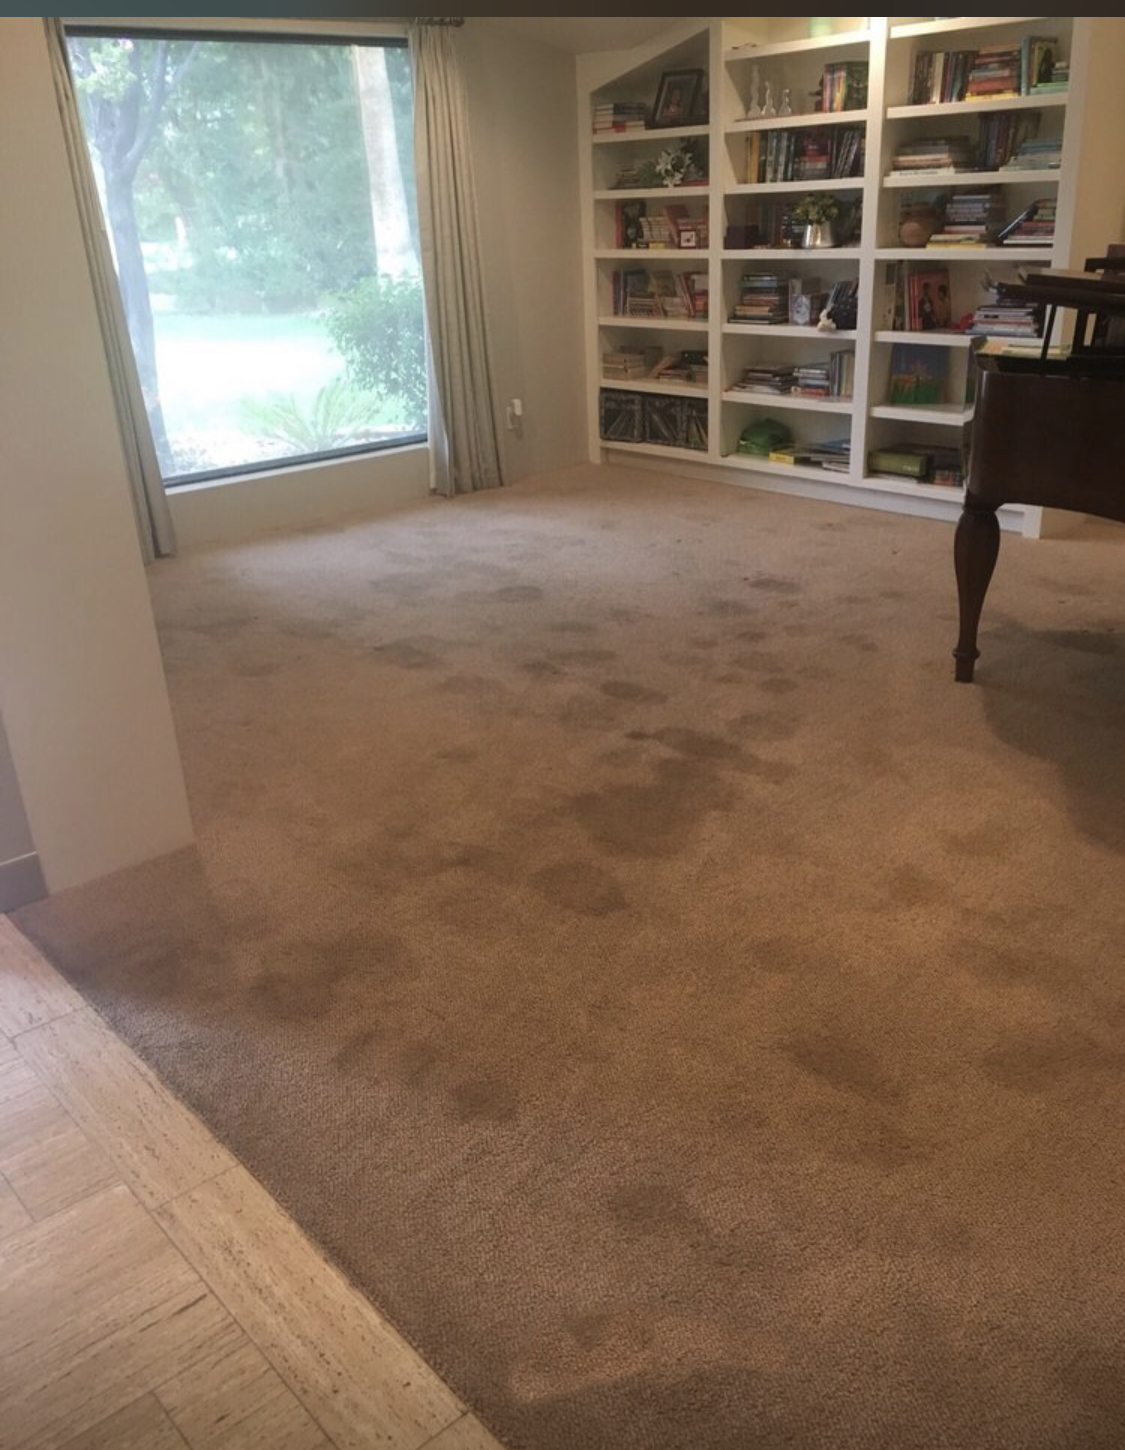 carpet cleaning phoenix before and after photos